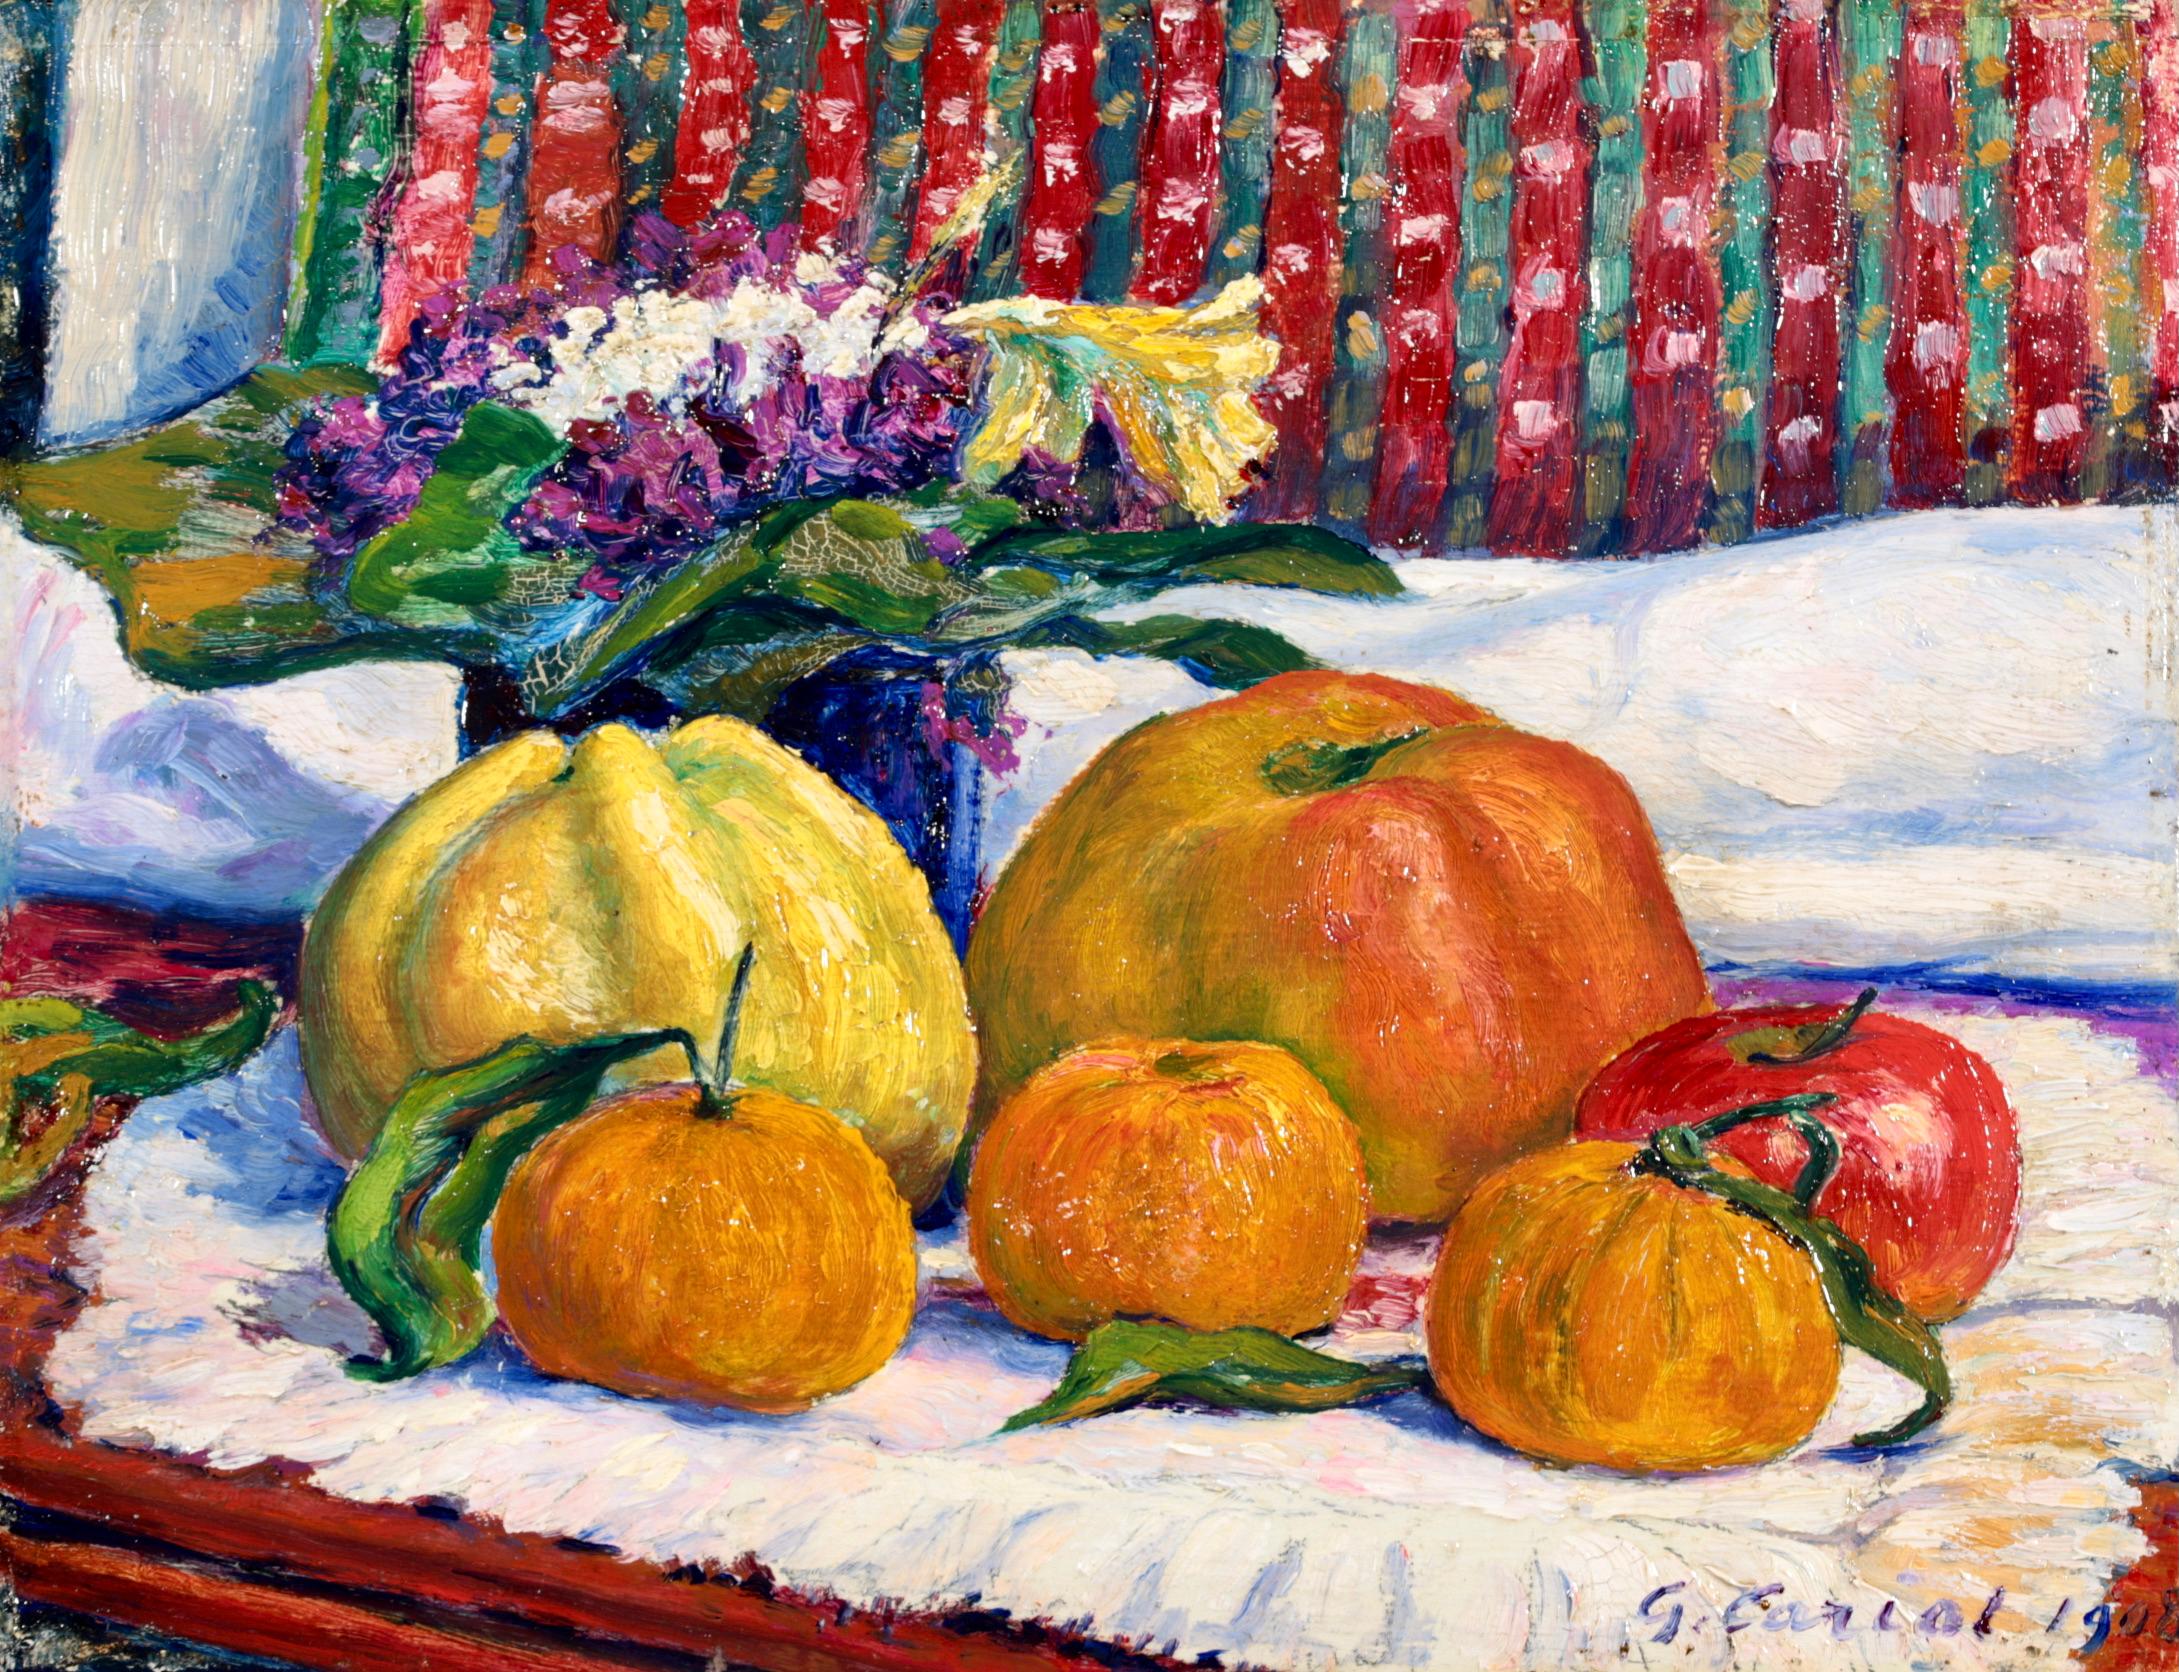 Gustave Camille Gaston Cariot Interior Painting - Nature Morte - Post Impressionist Still Life Painting by Gustave Cariot